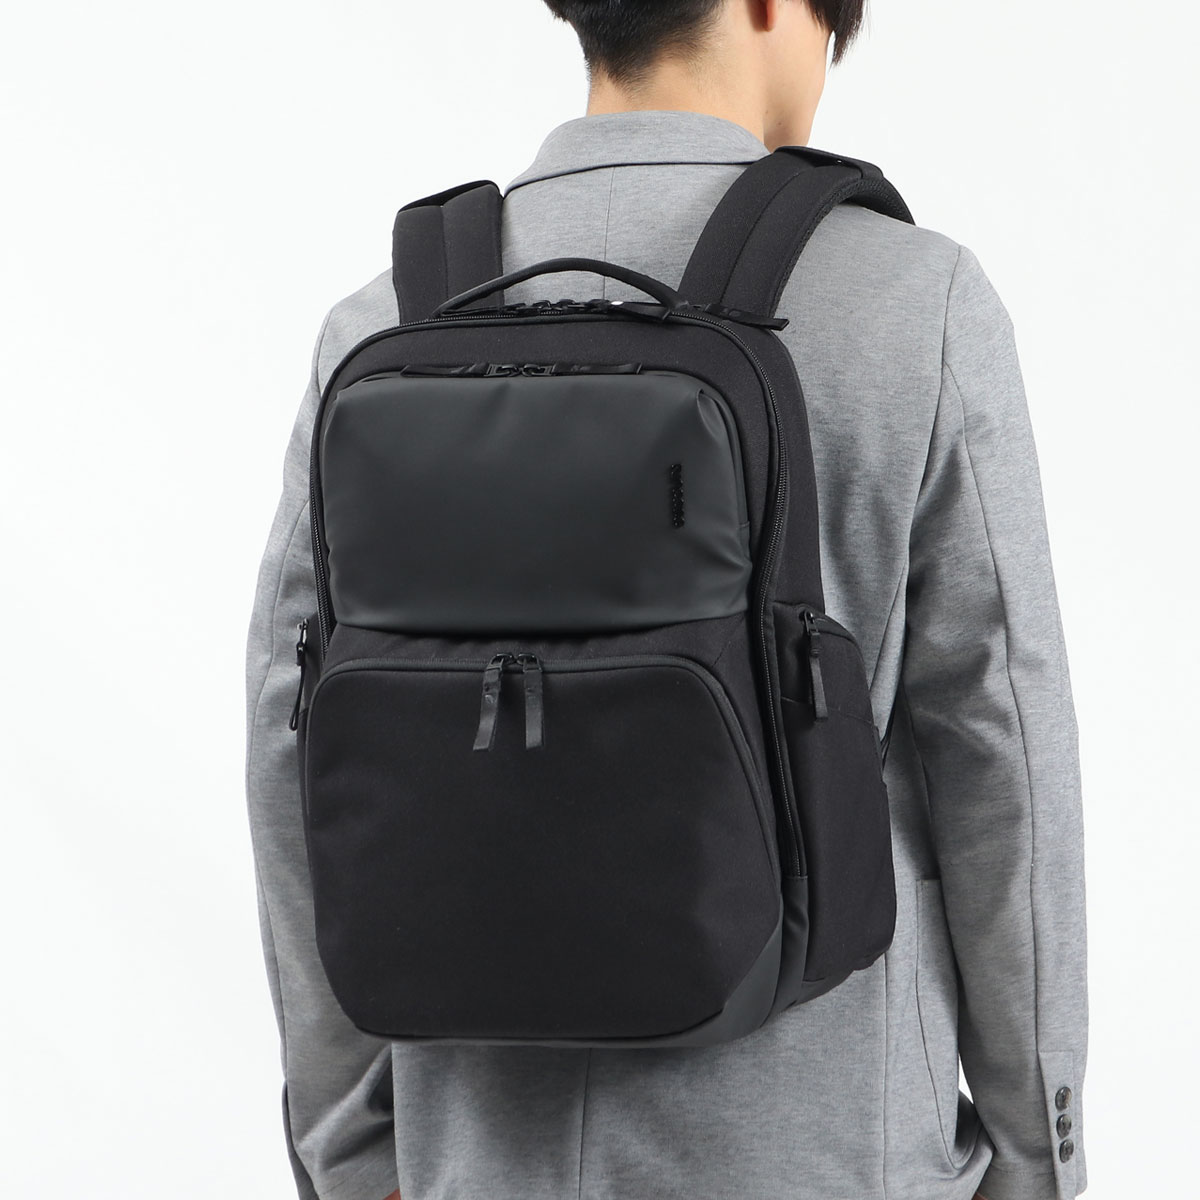 incase リュック・バッグパック A.R.C. Commuter Pack